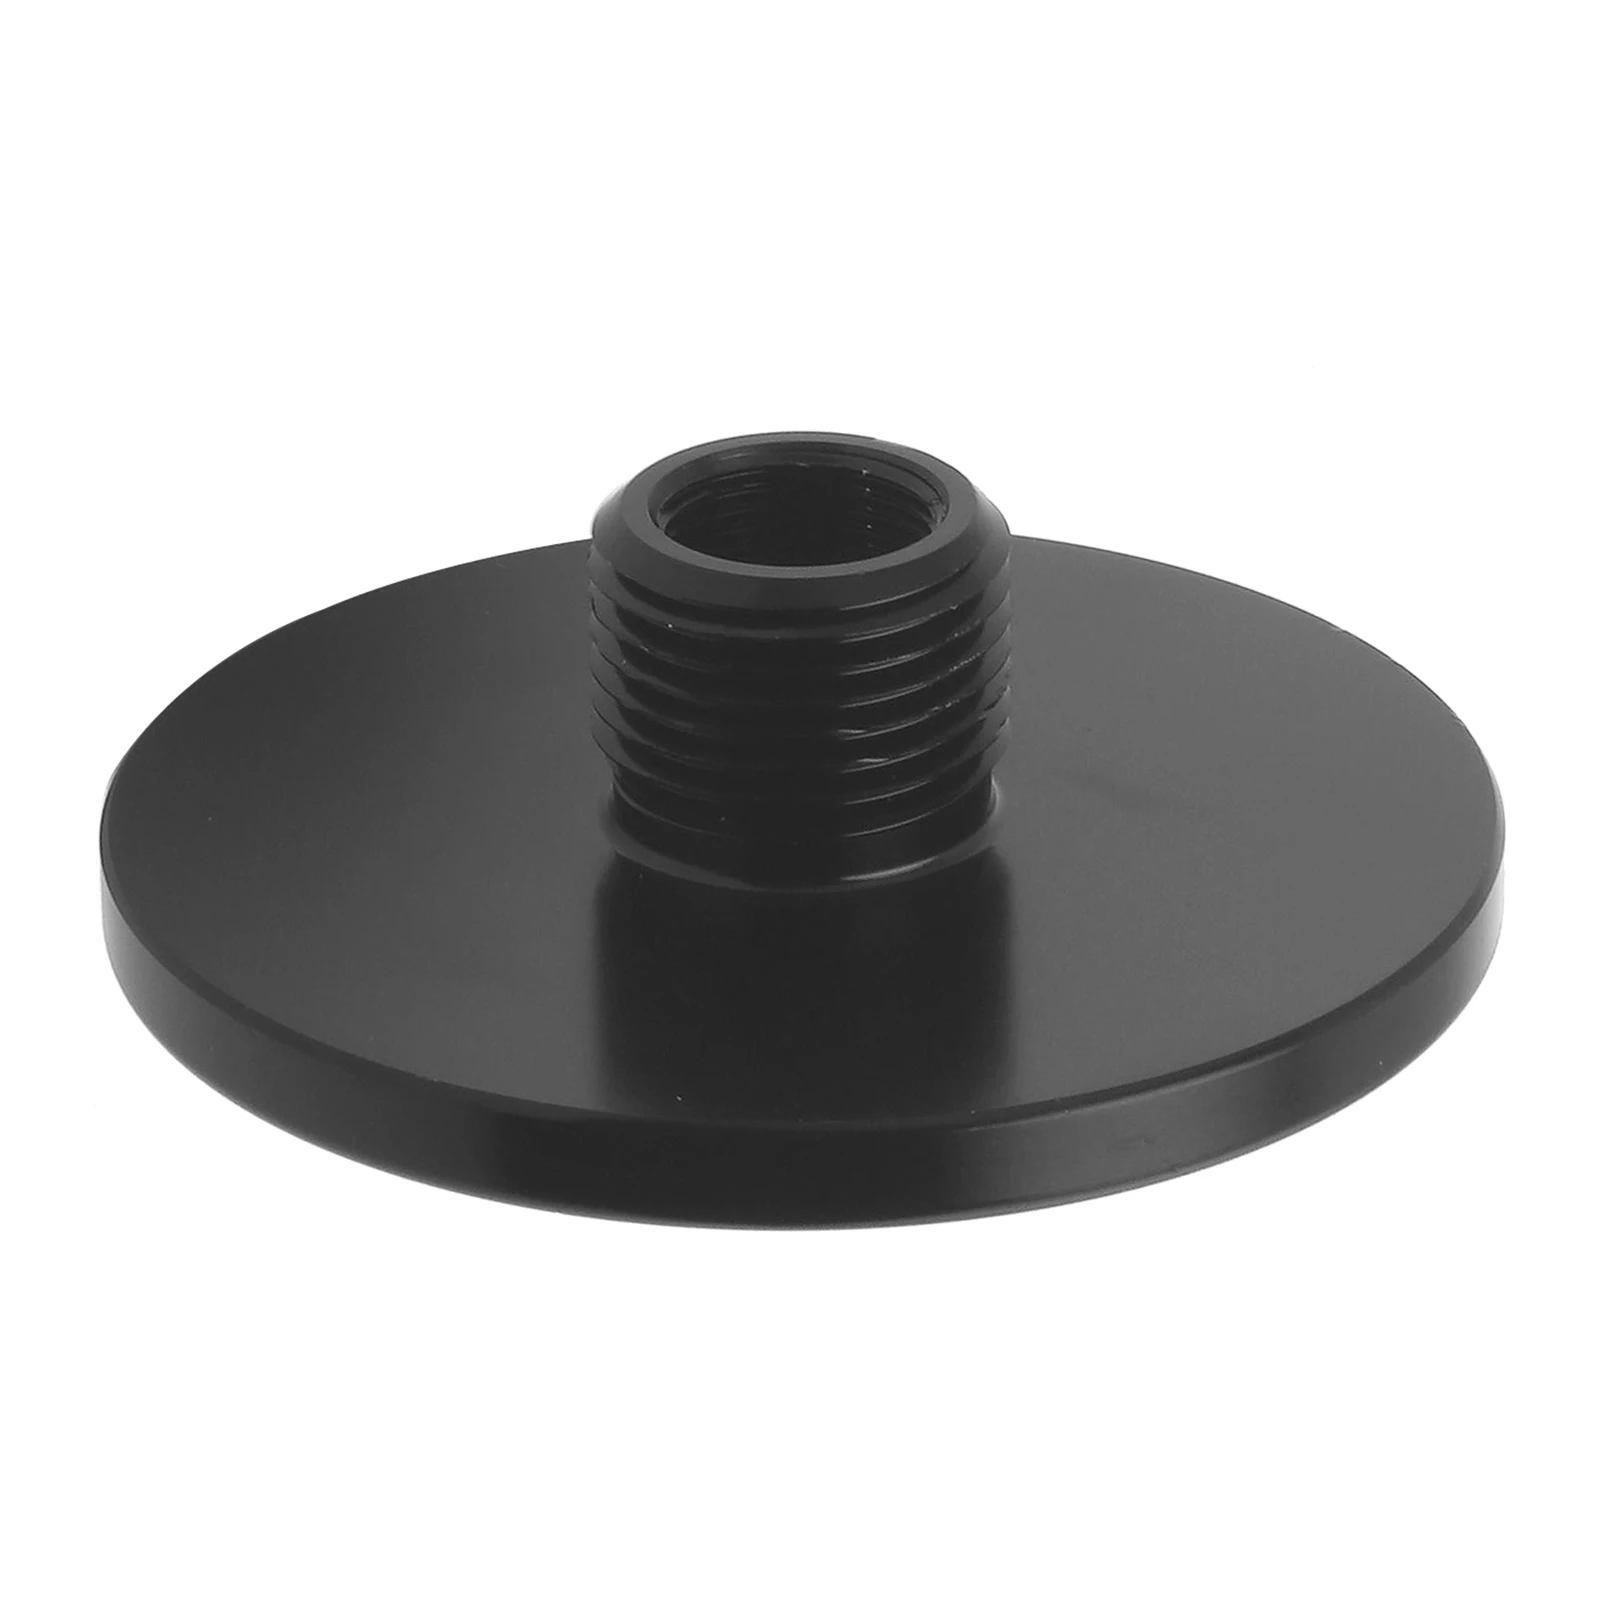 1/2-28 to 3/4-16 2.5 Diameter Threaded  Replacement Replace Part, 1-2x28 inside diameter X 3-4x16 outside diameter